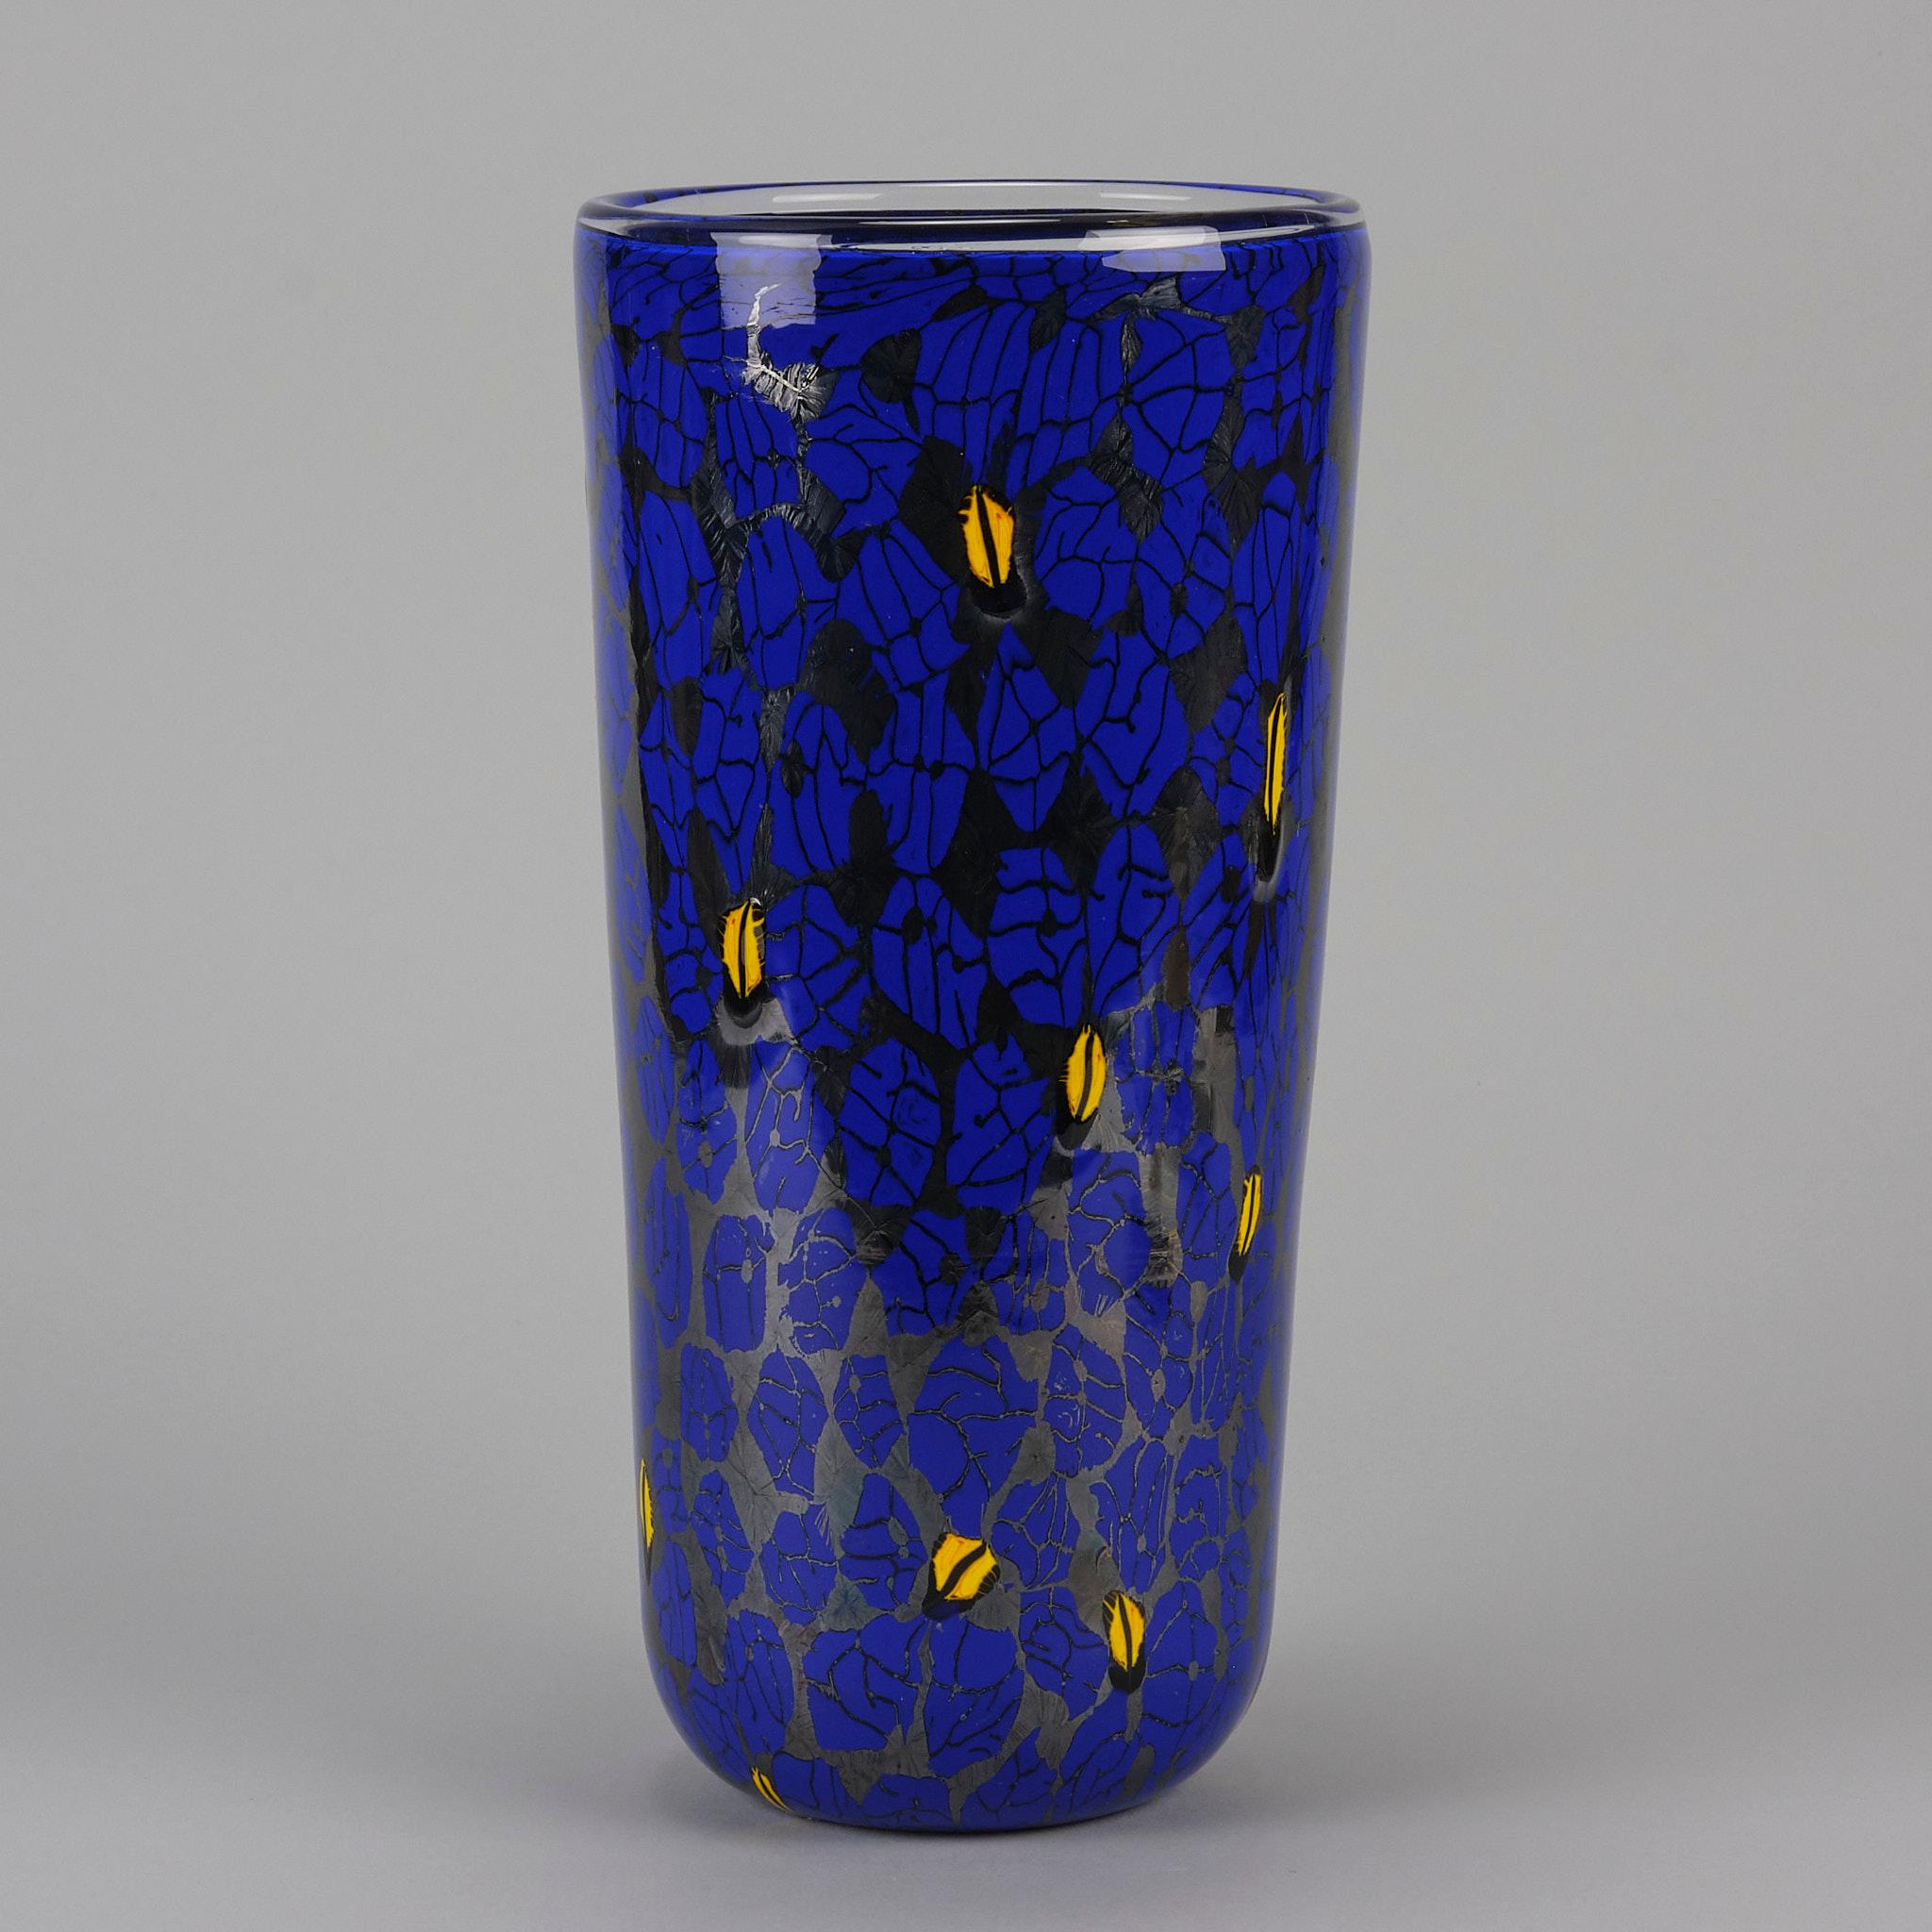 A fabulous Vittorio Ferro clear glass vase with fused marbled murrines in hues of blue and yellow. Marked Ferro Vittorio and with original Murano label

ADDITIONAL INFORMATION
Height:                                      30.5 cm                 